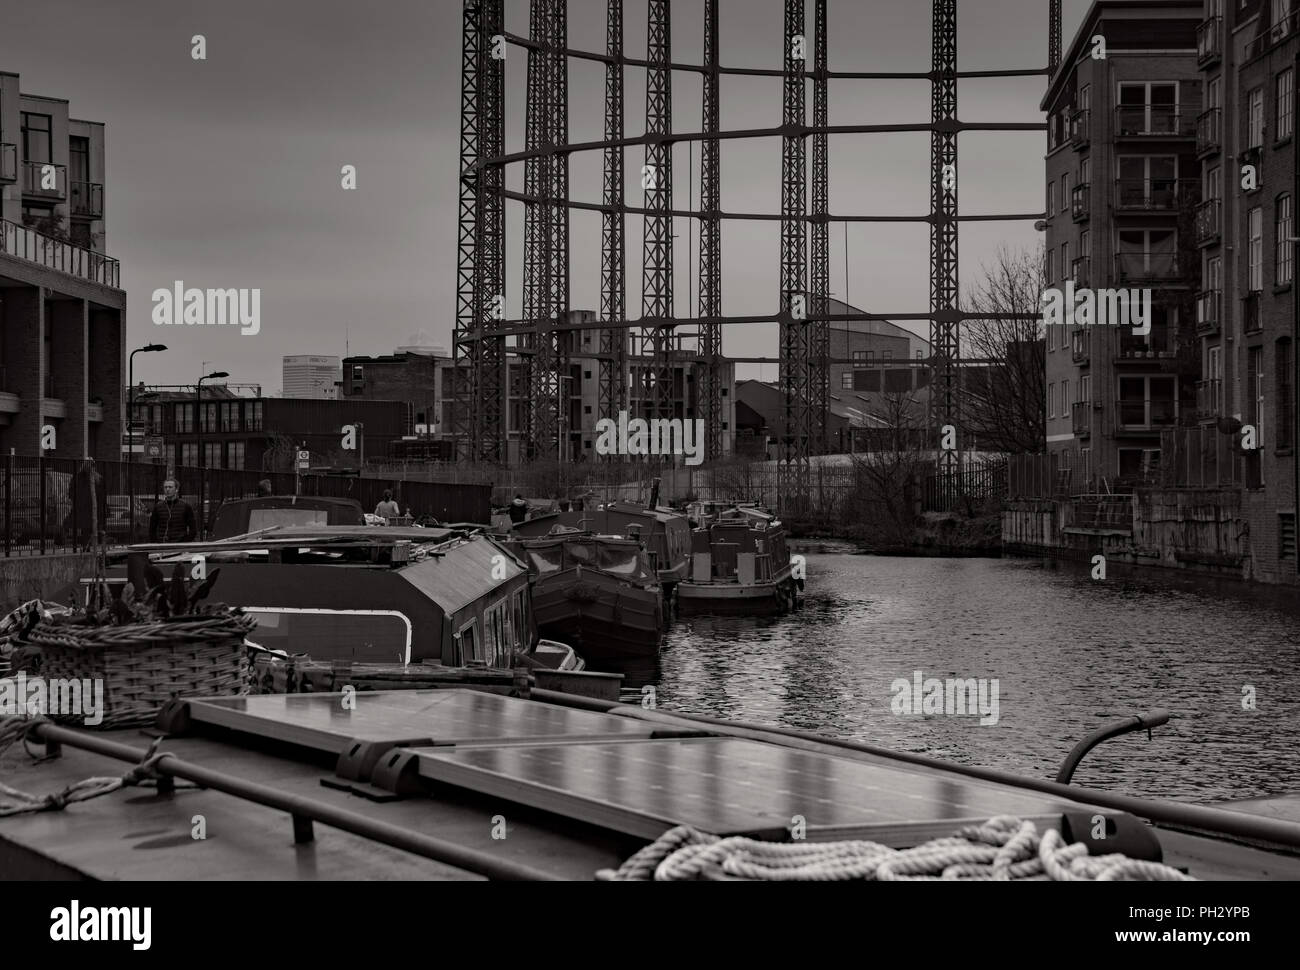 Canal Boats double moored at Haggerston on the Regents canal not far from Bethnal green. Under the shadow of the empty Gas holder. Stock Photo